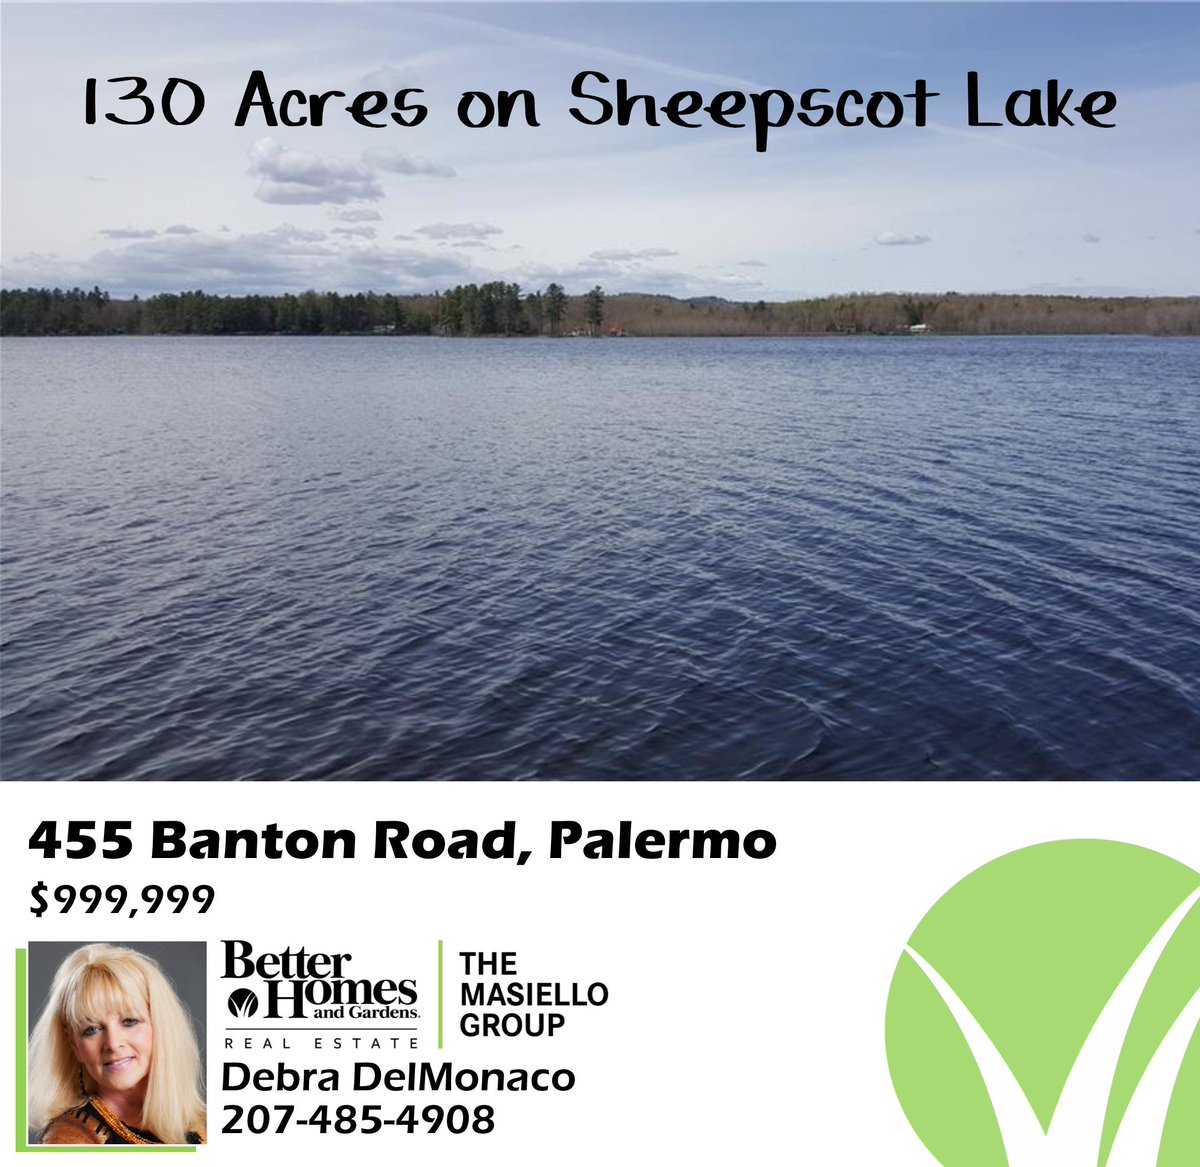 NEW LISTING!  This unique one of a kind property has 130 acres with 1,730 feet of waterfrontage on Sheepscot lake! @debra0426  #ohtheviews #landlisting #listwithTMG